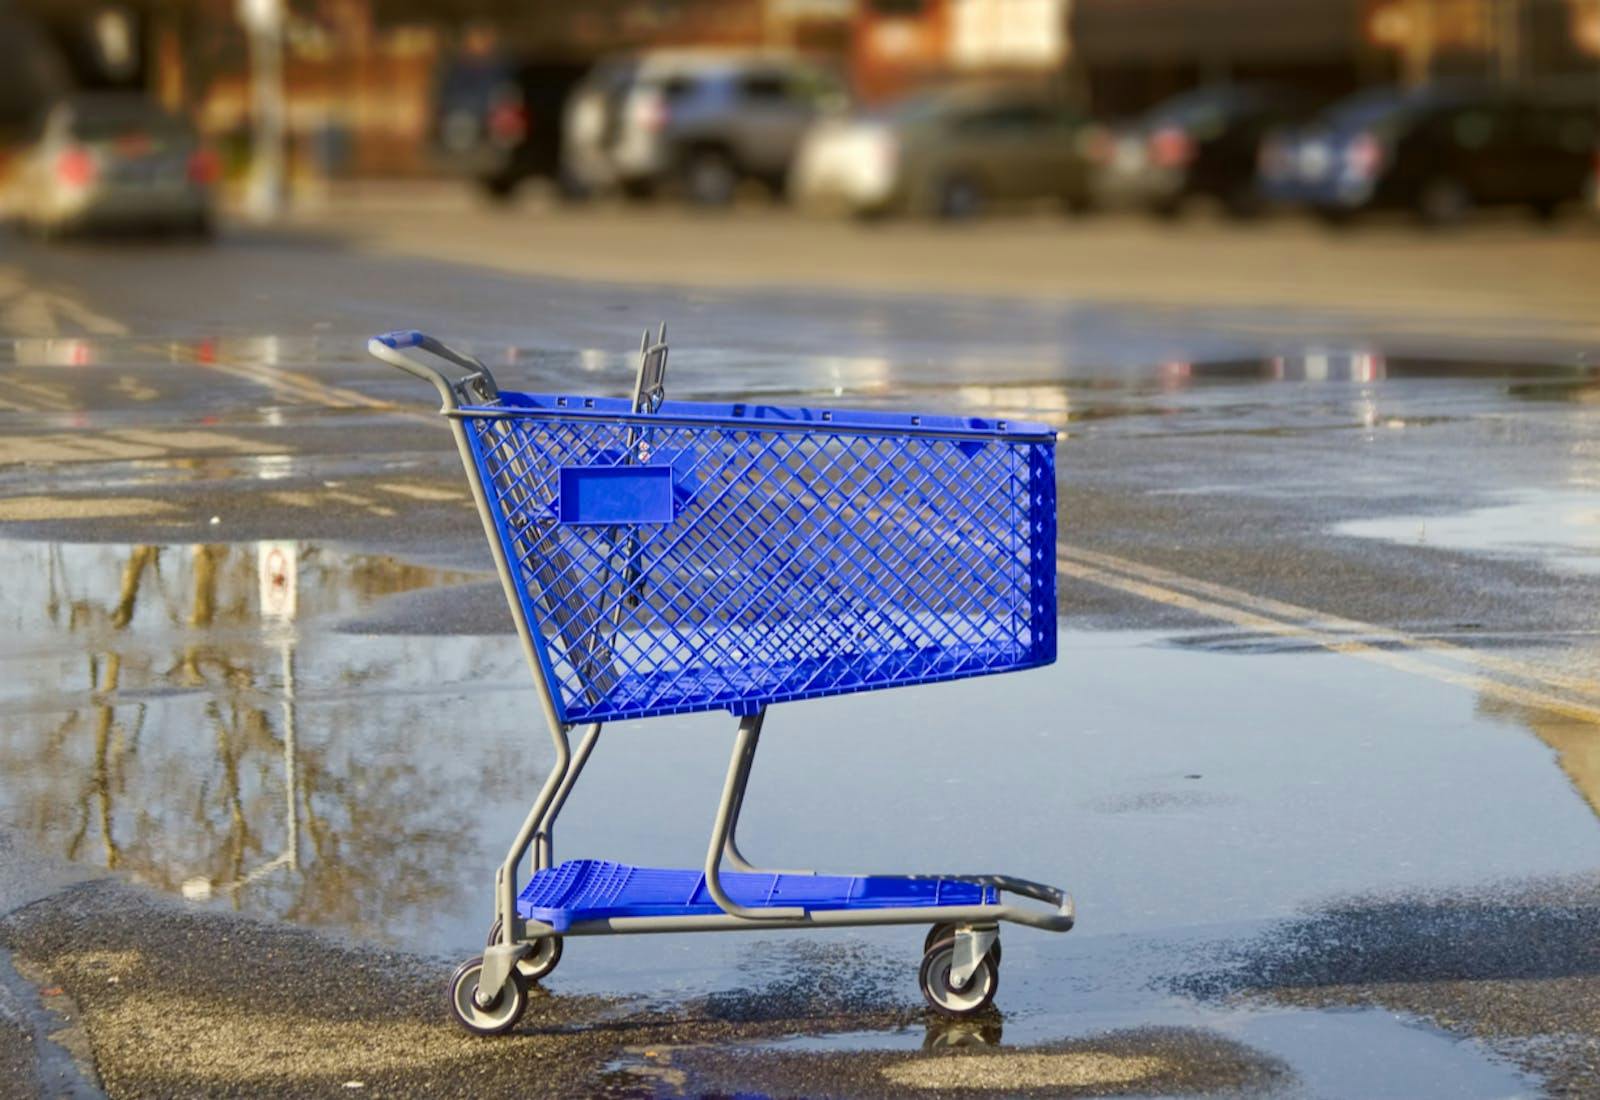 An empty shopping cart stands in a rainy parking lot